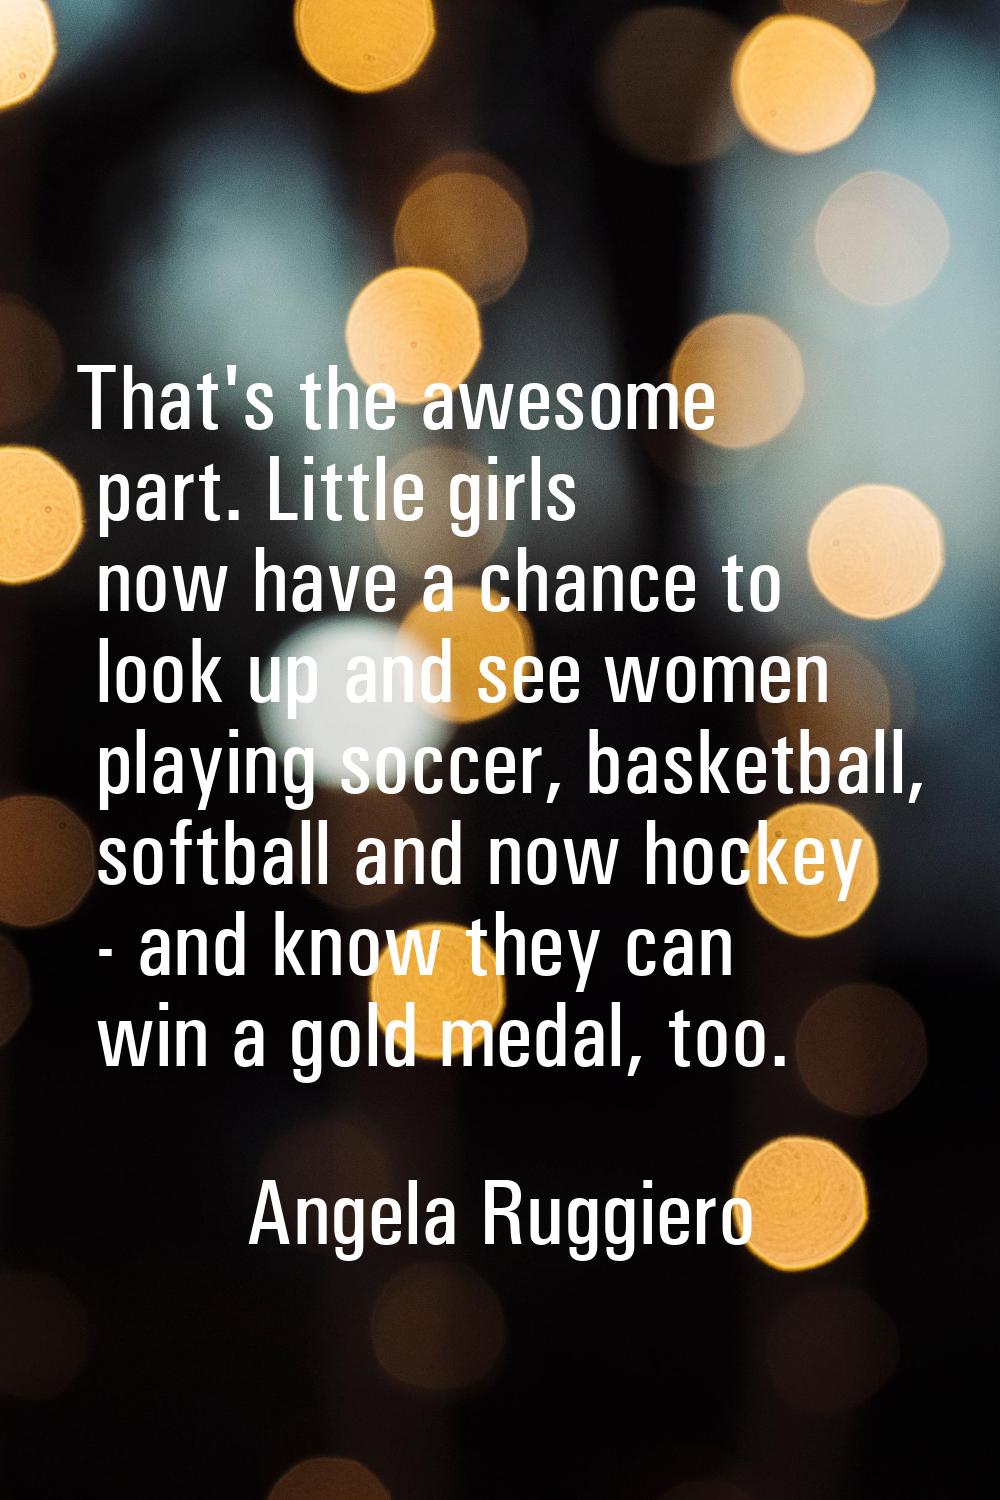 That's the awesome part. Little girls now have a chance to look up and see women playing soccer, ba